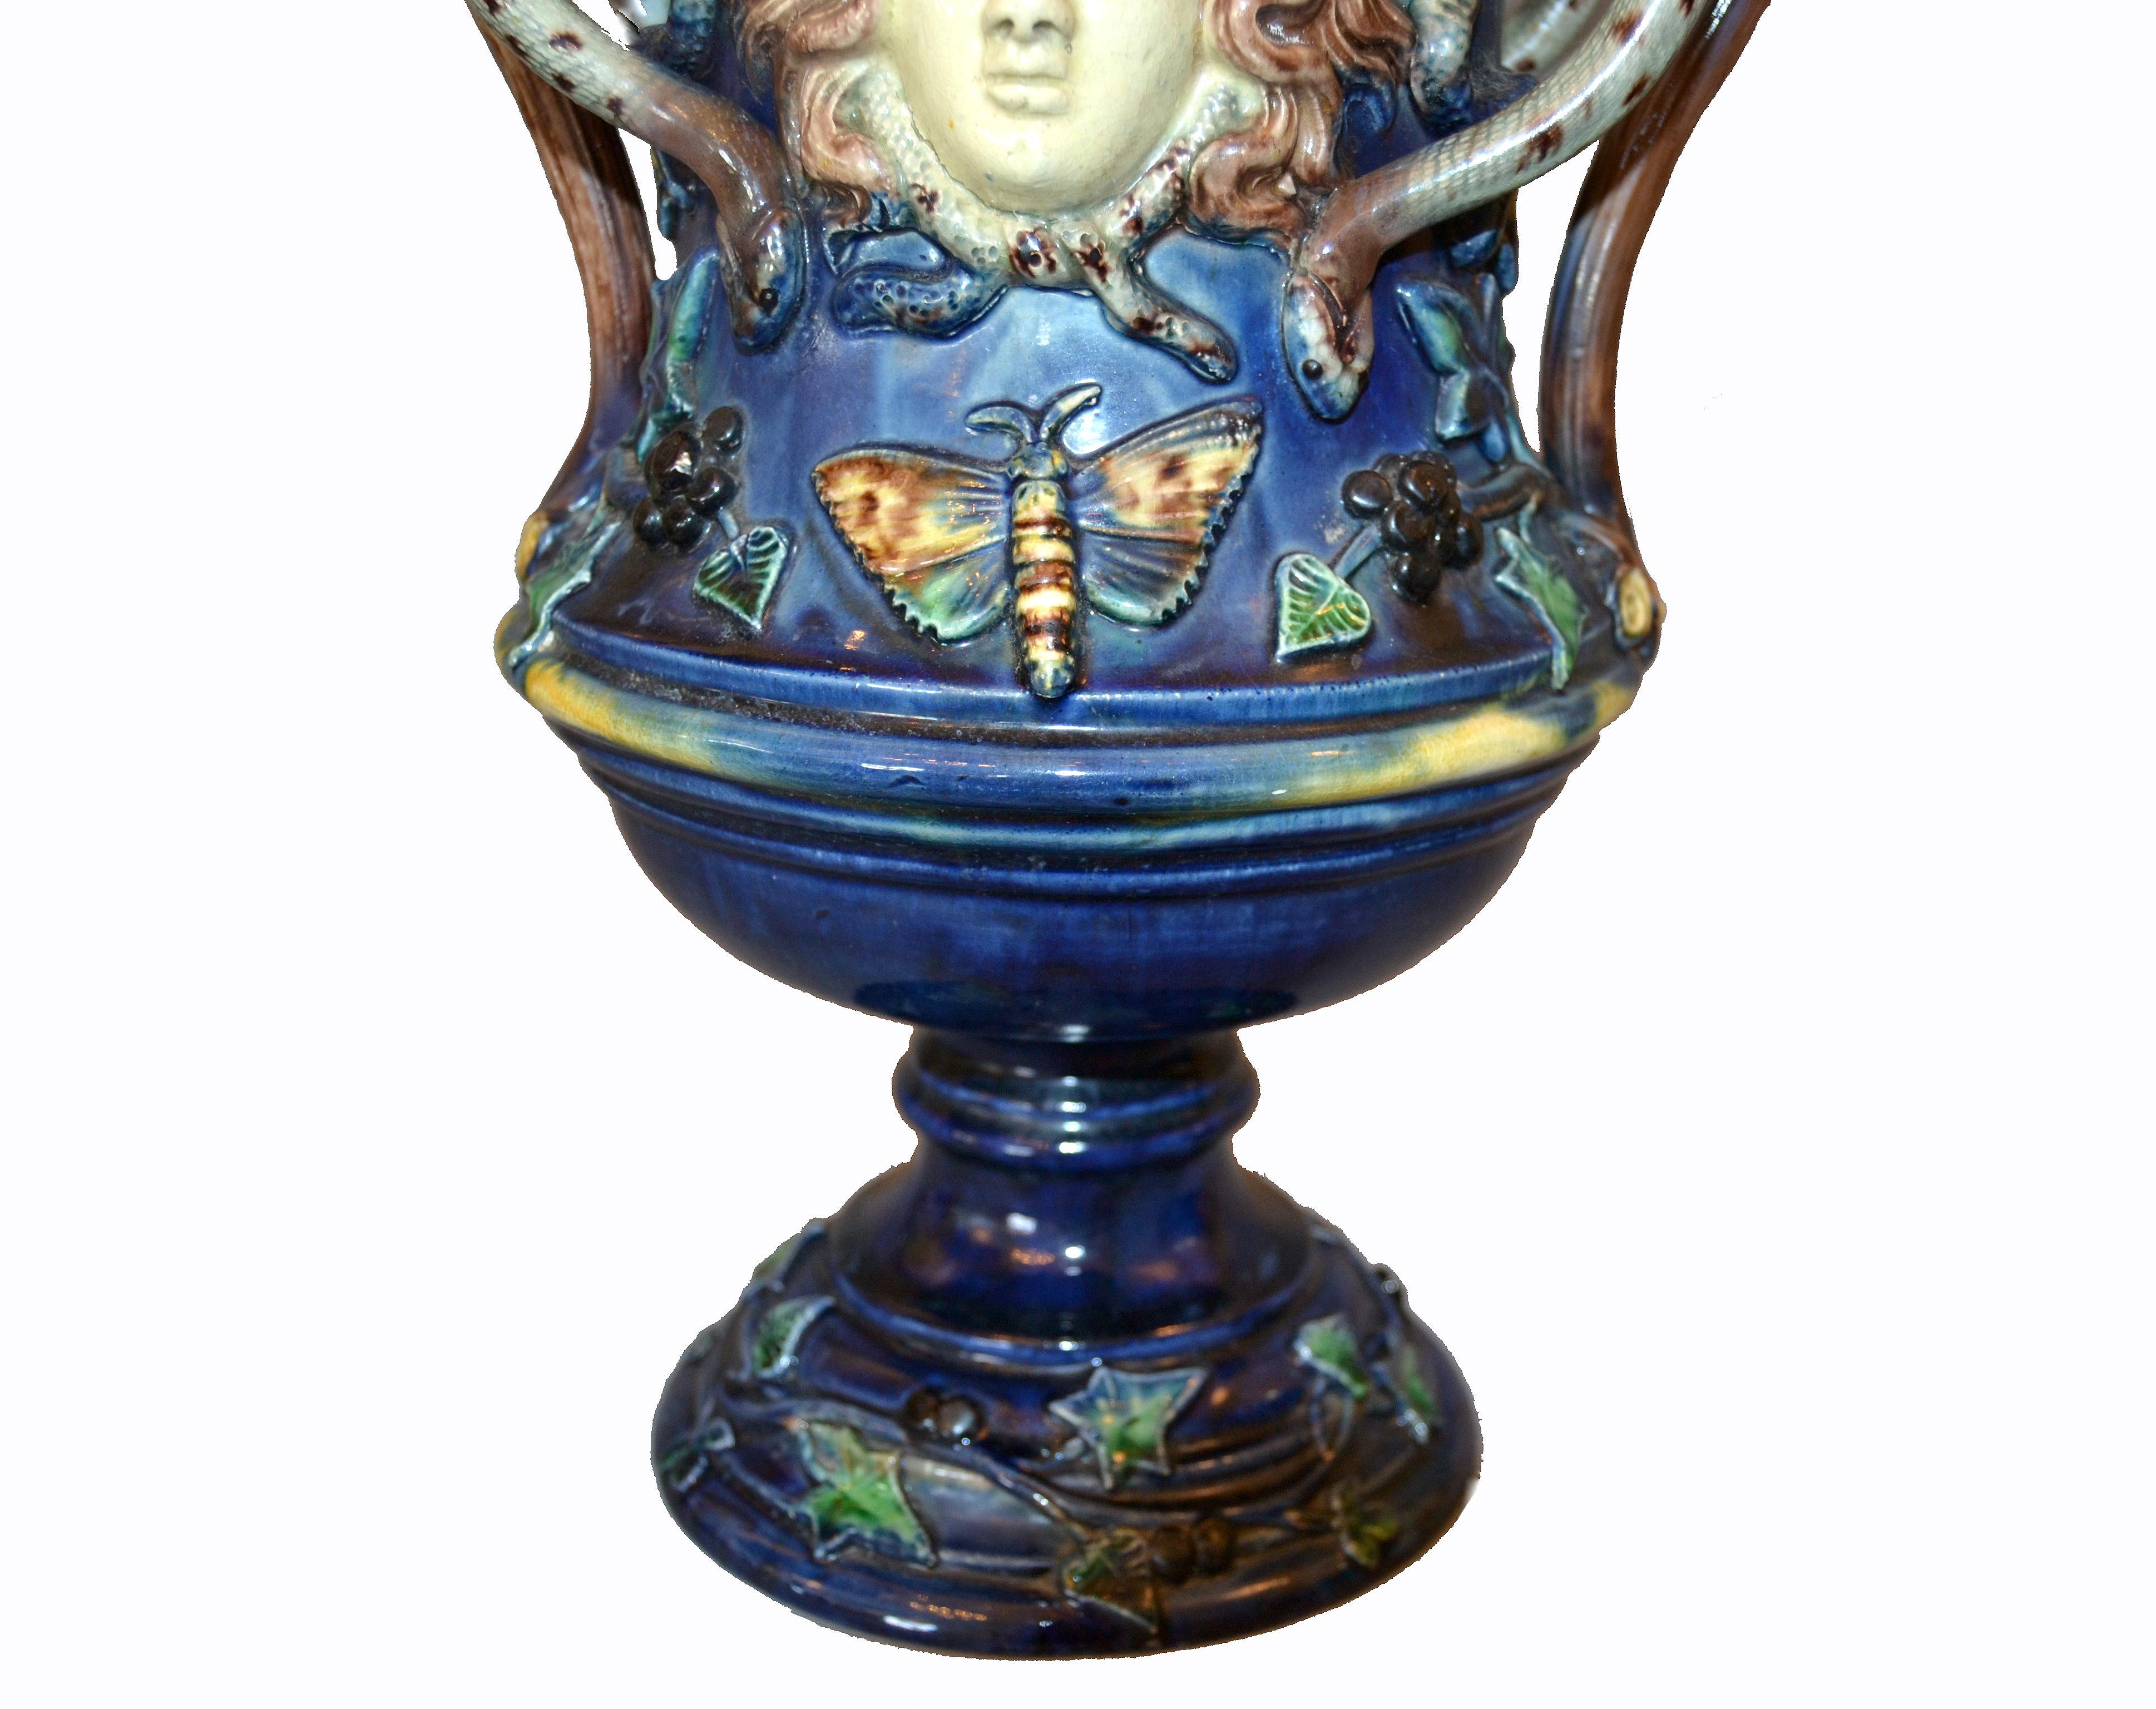 French 19th Century Antique Hand Painted Ceramic Vase Wine Decanter Wooden Riser For Sale 4